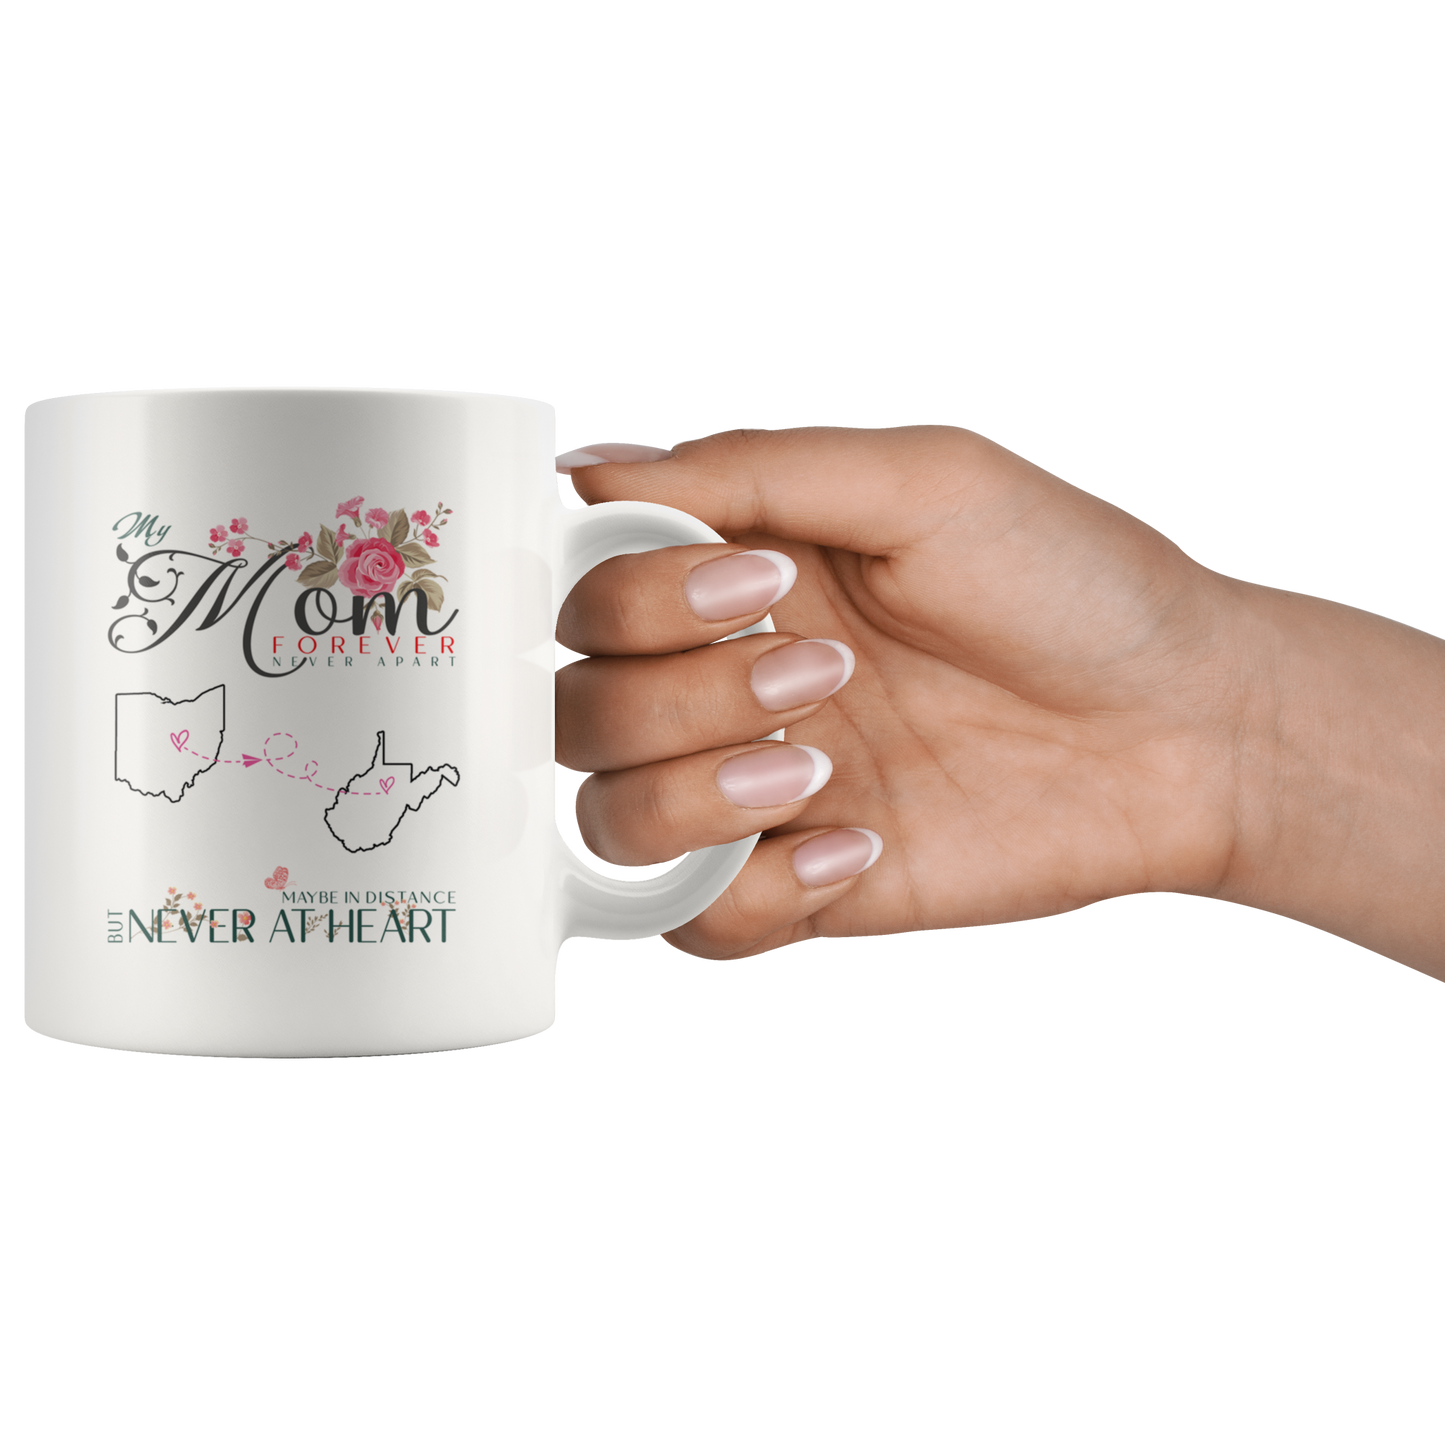 M-20447487-sp-24166 - [ Ohio | West Virginia | 1 ]Mothers Day Gifts Coffee Mug Distance Ohio West Virginia My